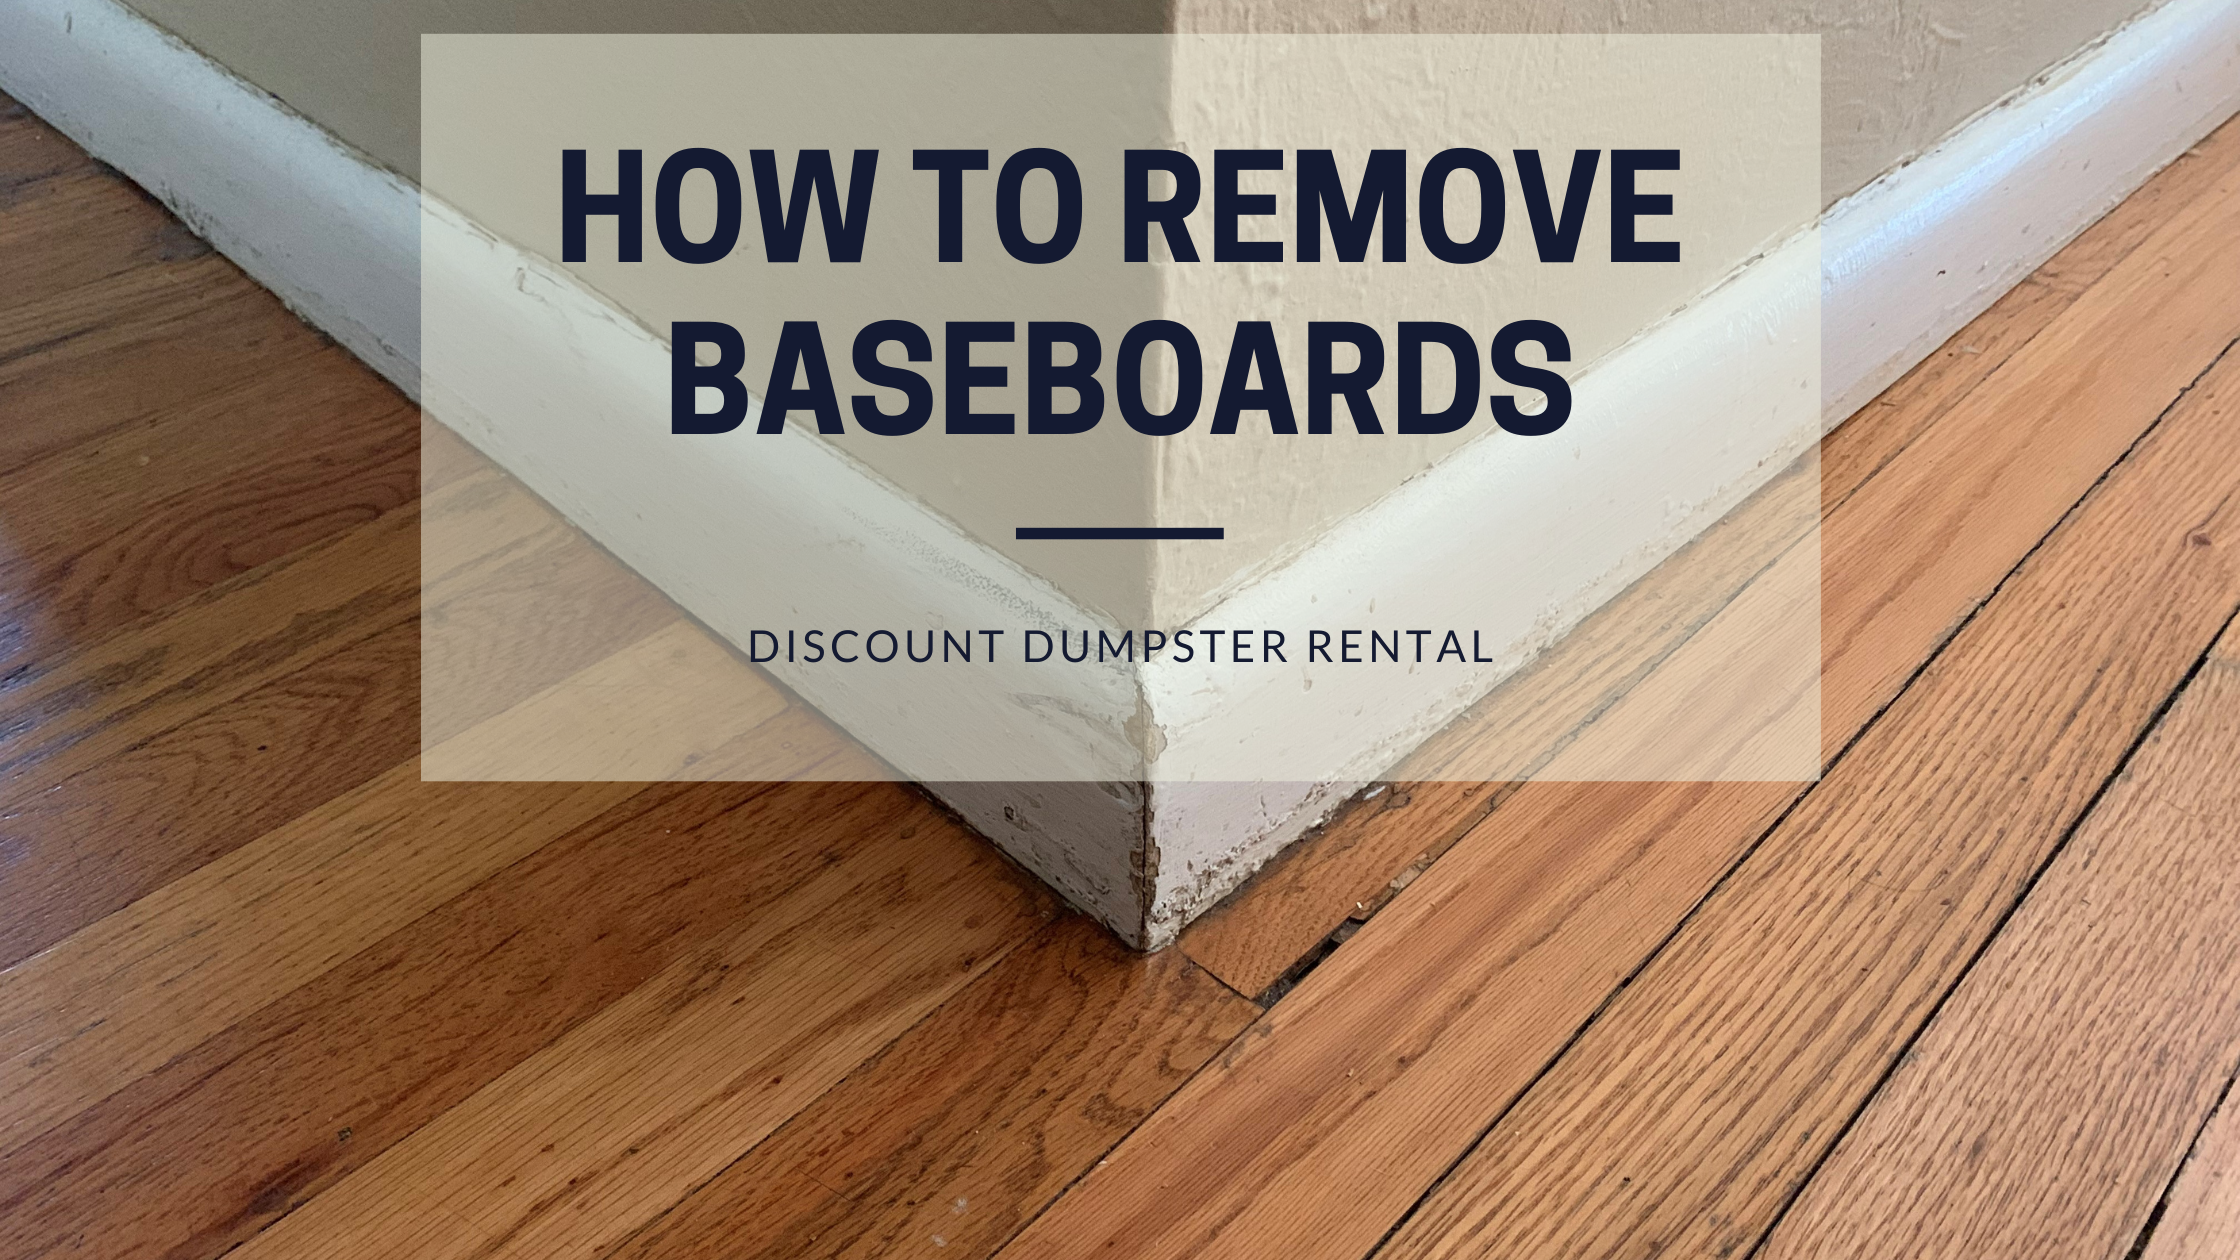 How To Clean Your Baseboards Without Straining Your Back